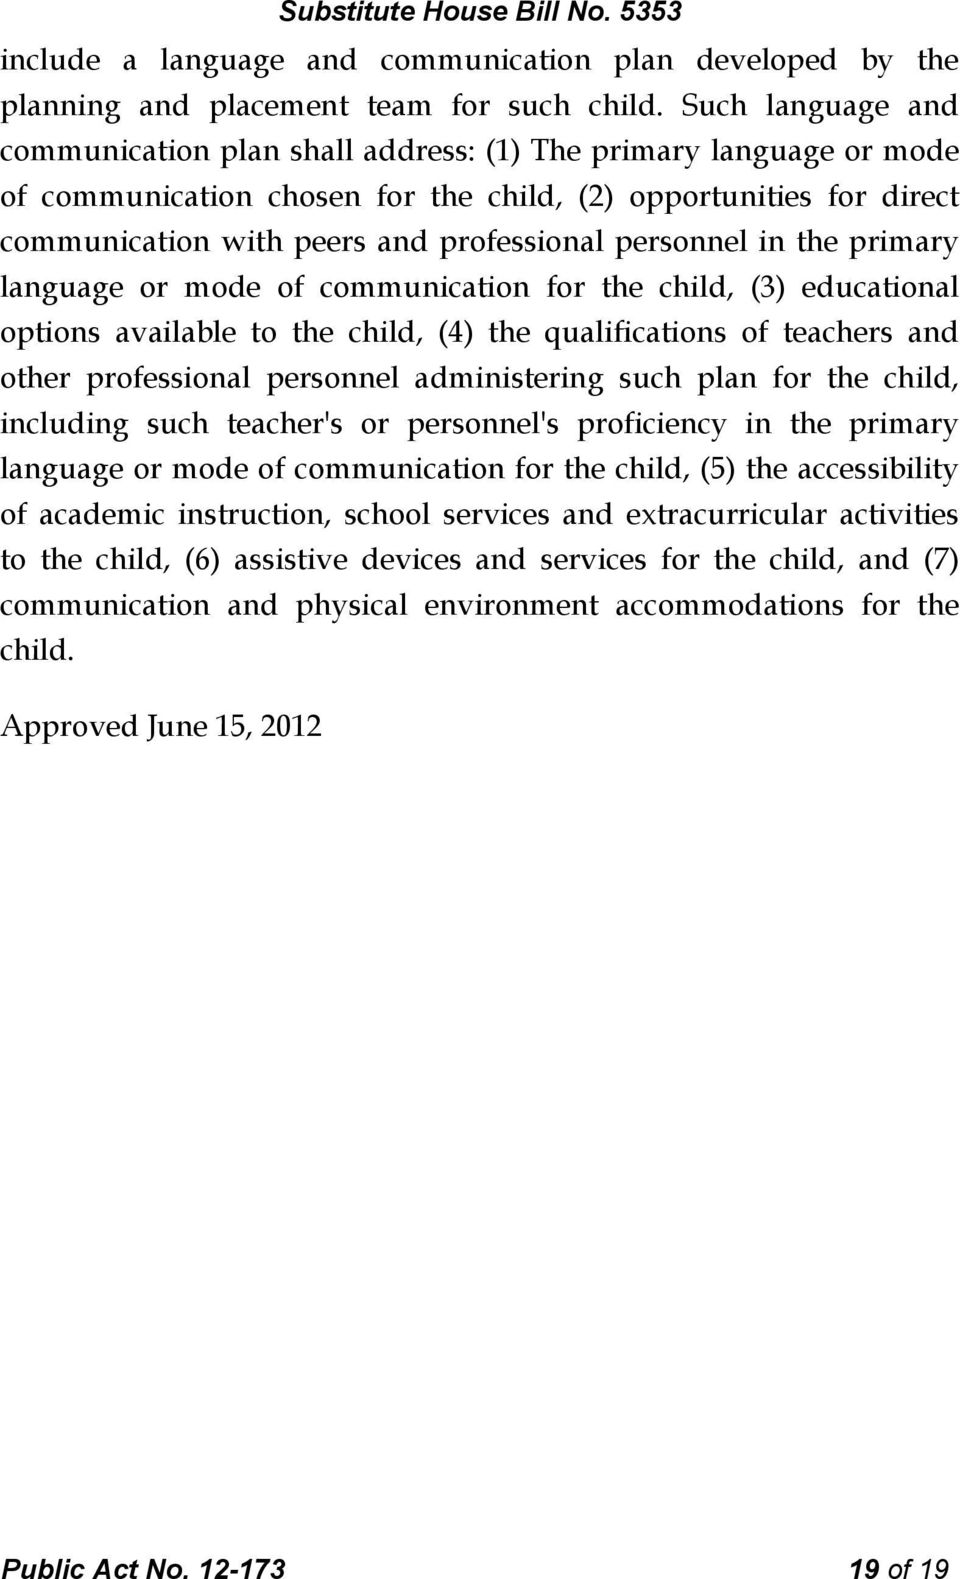 personnel in the primary language or mode of communication for the child, (3) educational options available to the child, (4) the qualifications of teachers and other professional personnel